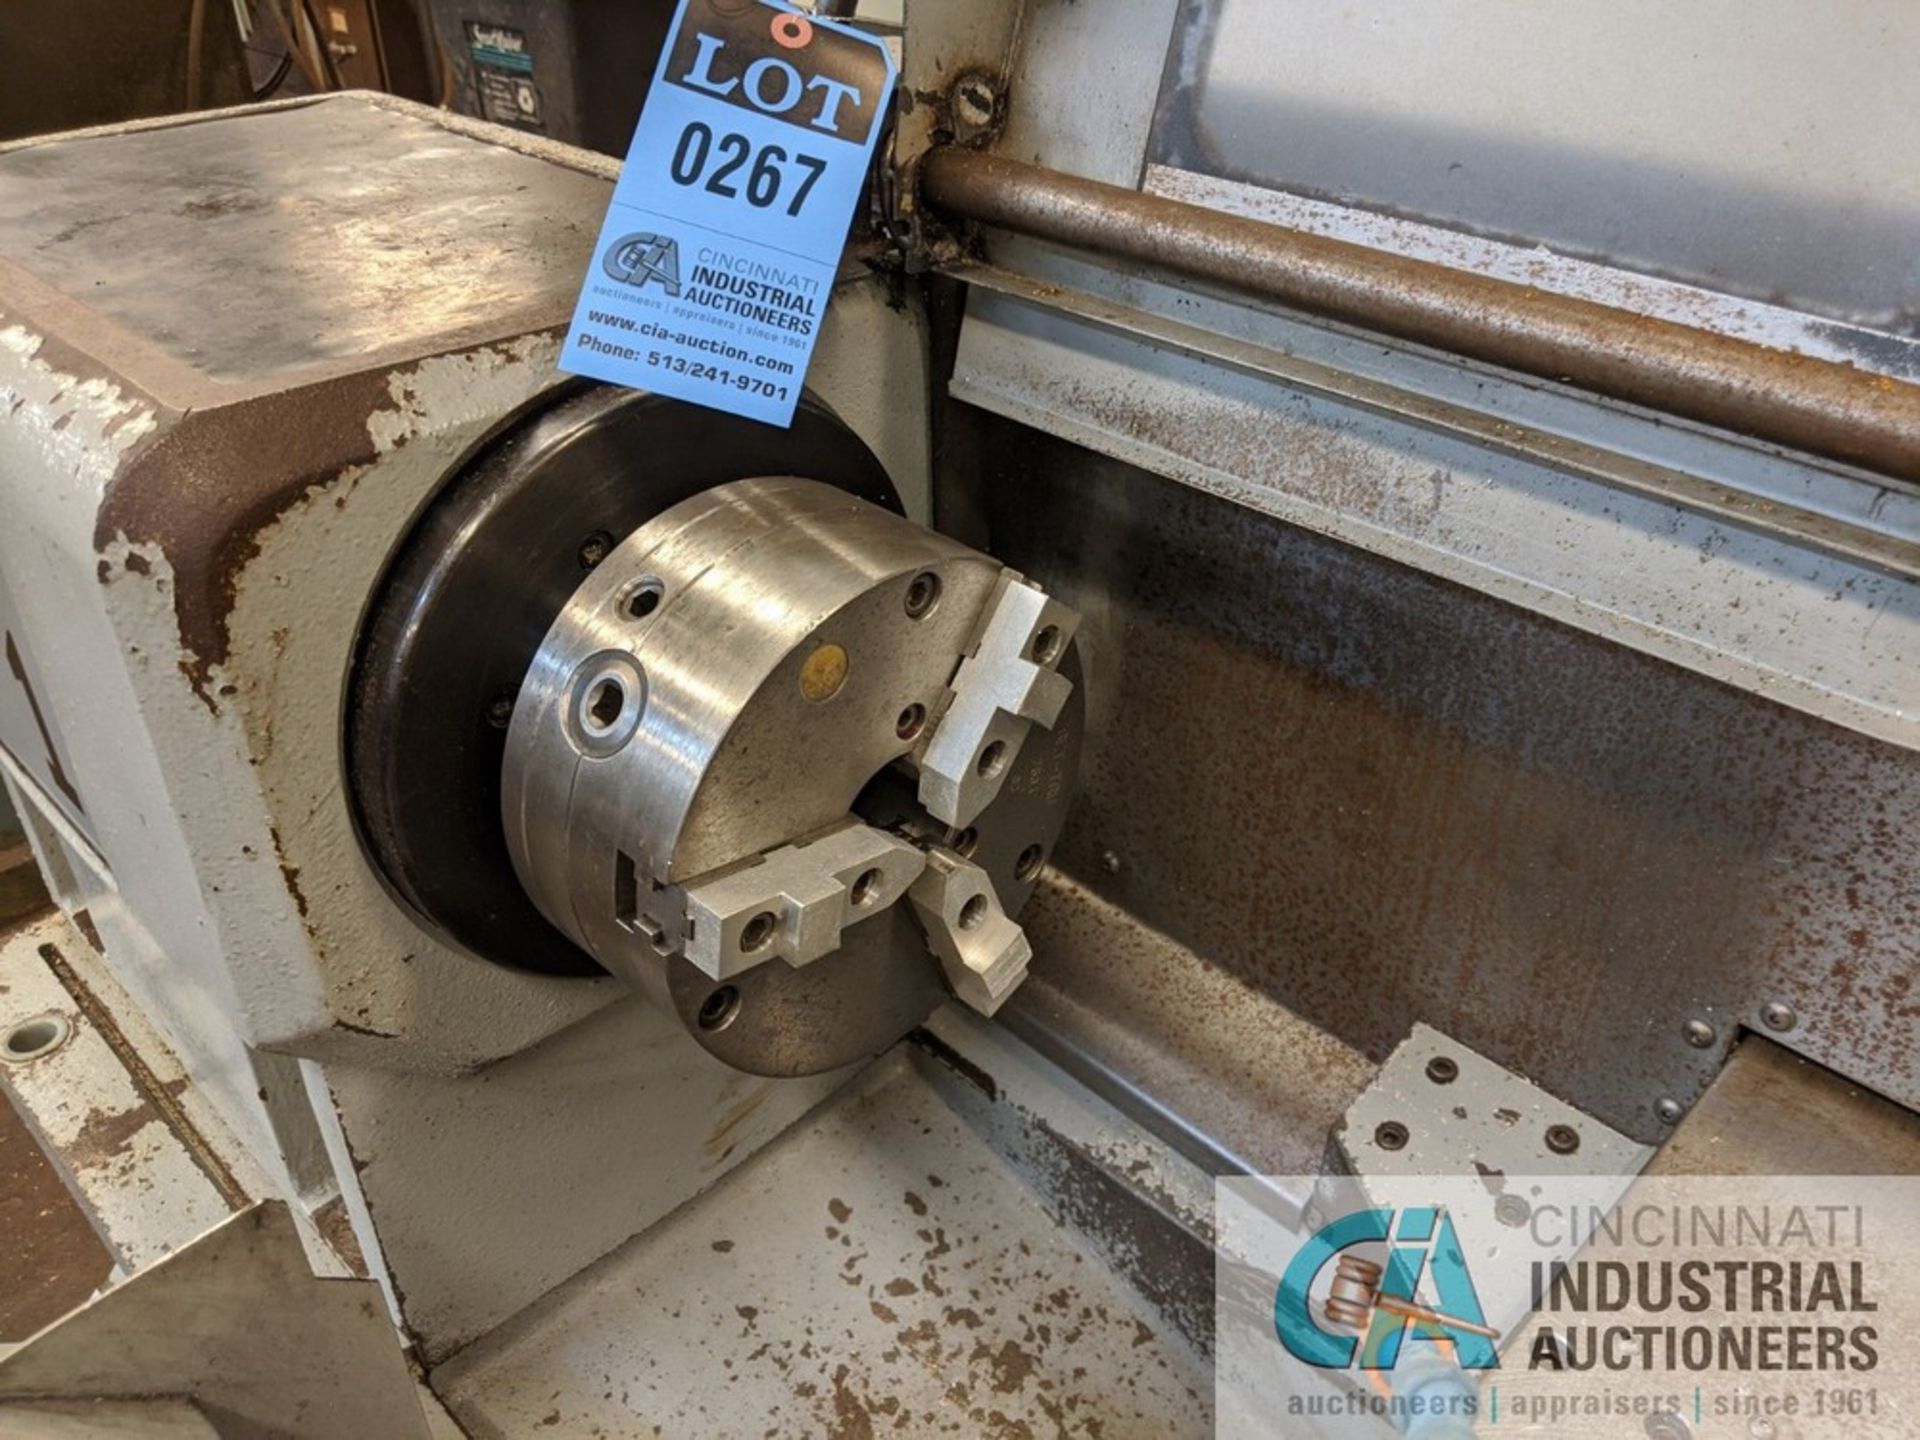 14" X 30" HAAS MODEL TL-1 CNC TOOLROOM LATHE, S/N: 307585, 8" 3-JAW CHUCK, TAILSTOCK, HAAS - Image 3 of 8